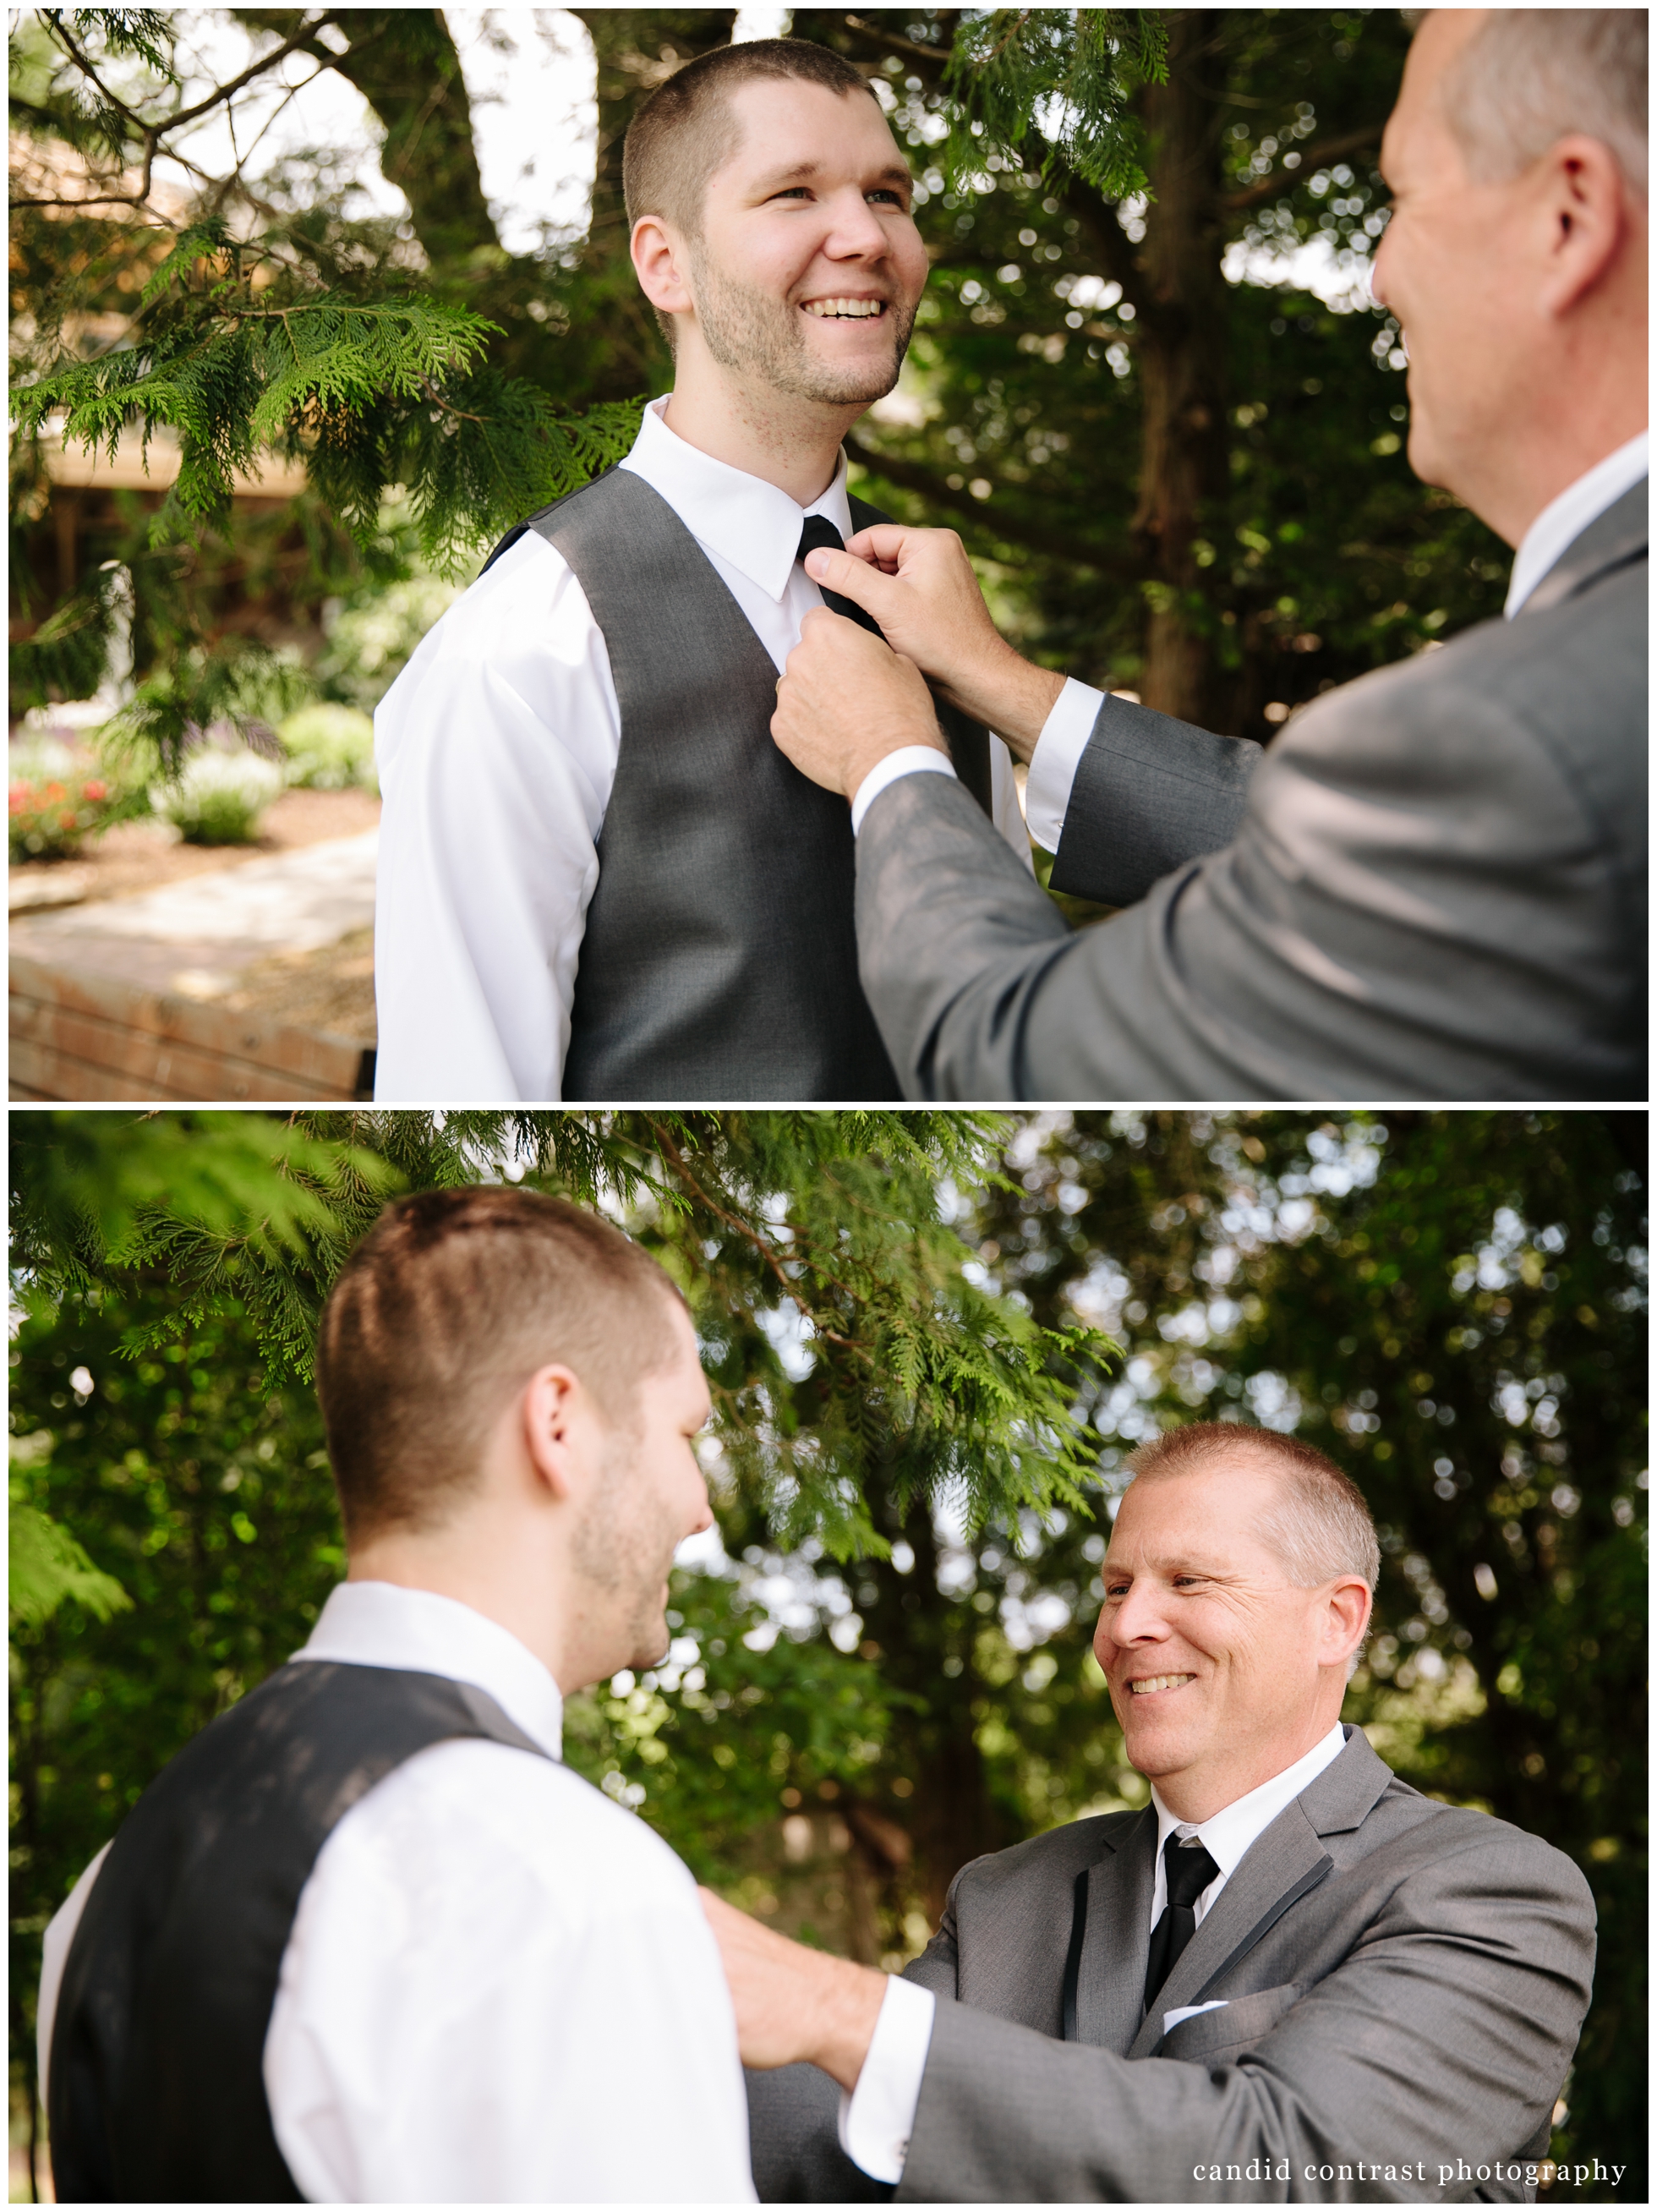 groom getting ready at dubuque arboretum at dubuque, ia wedding, candid contrast photography